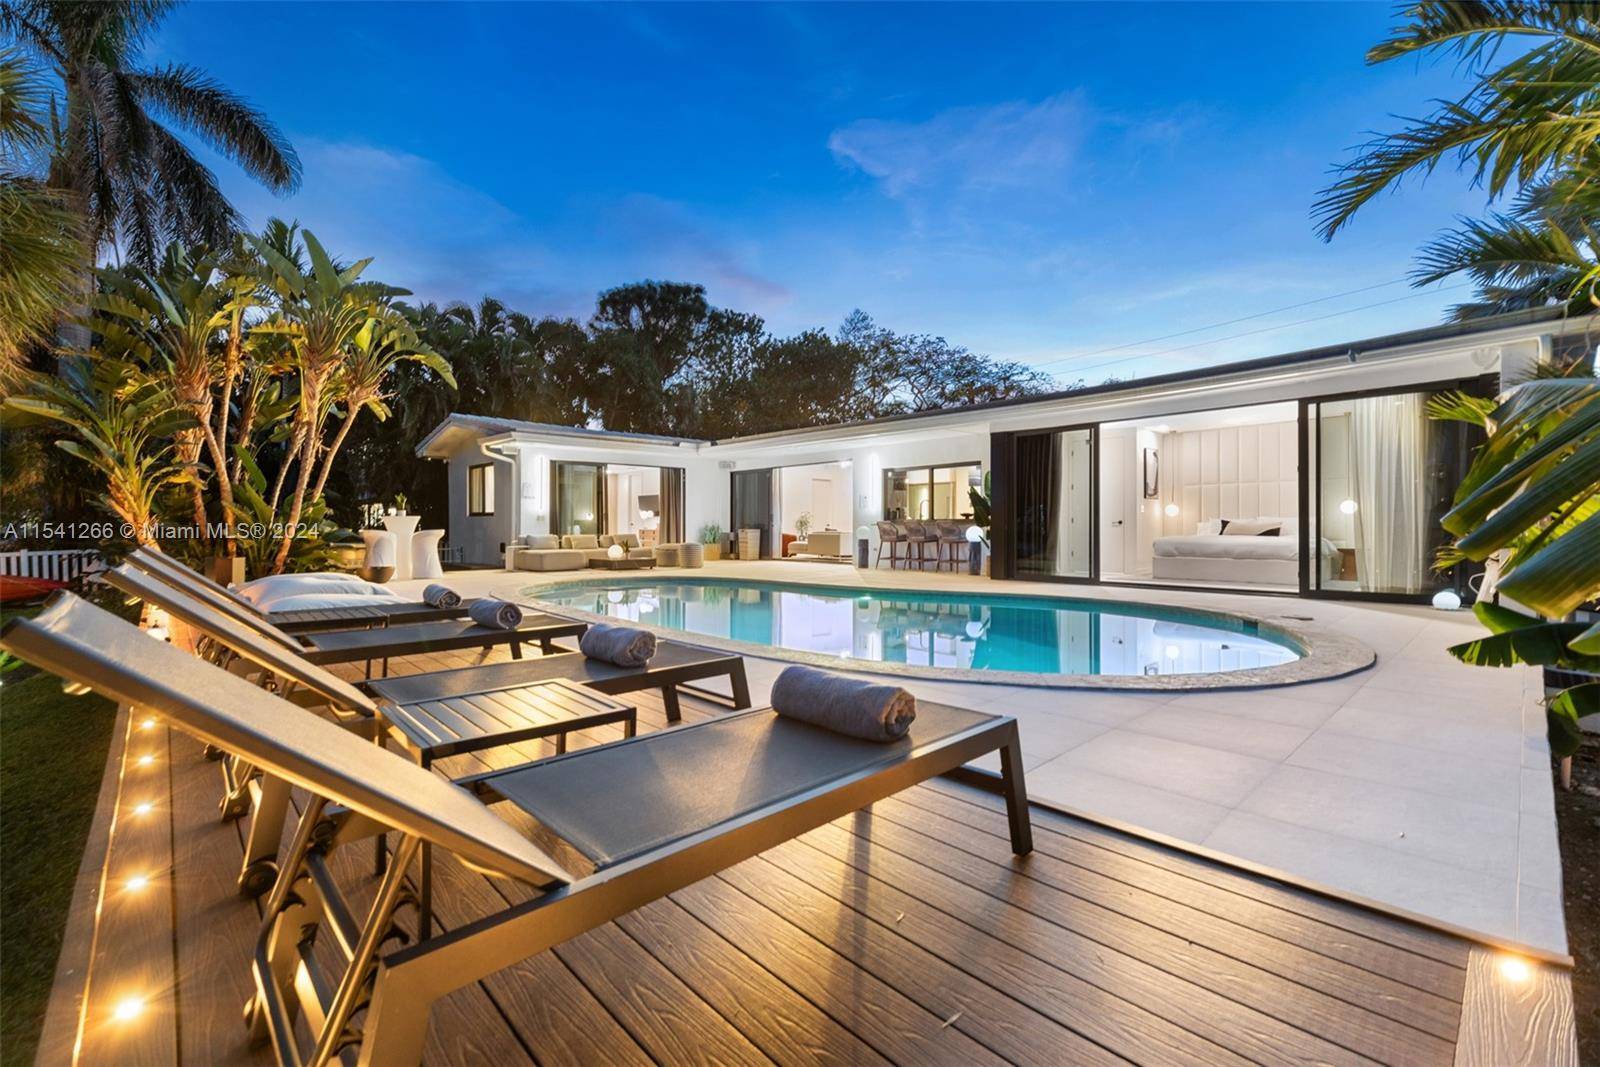 Step into this fully remodeled modern 5 bedroom, 4 bathroom residence nestled in the charming Golden Isles neighborhood of Hallandale Beach.